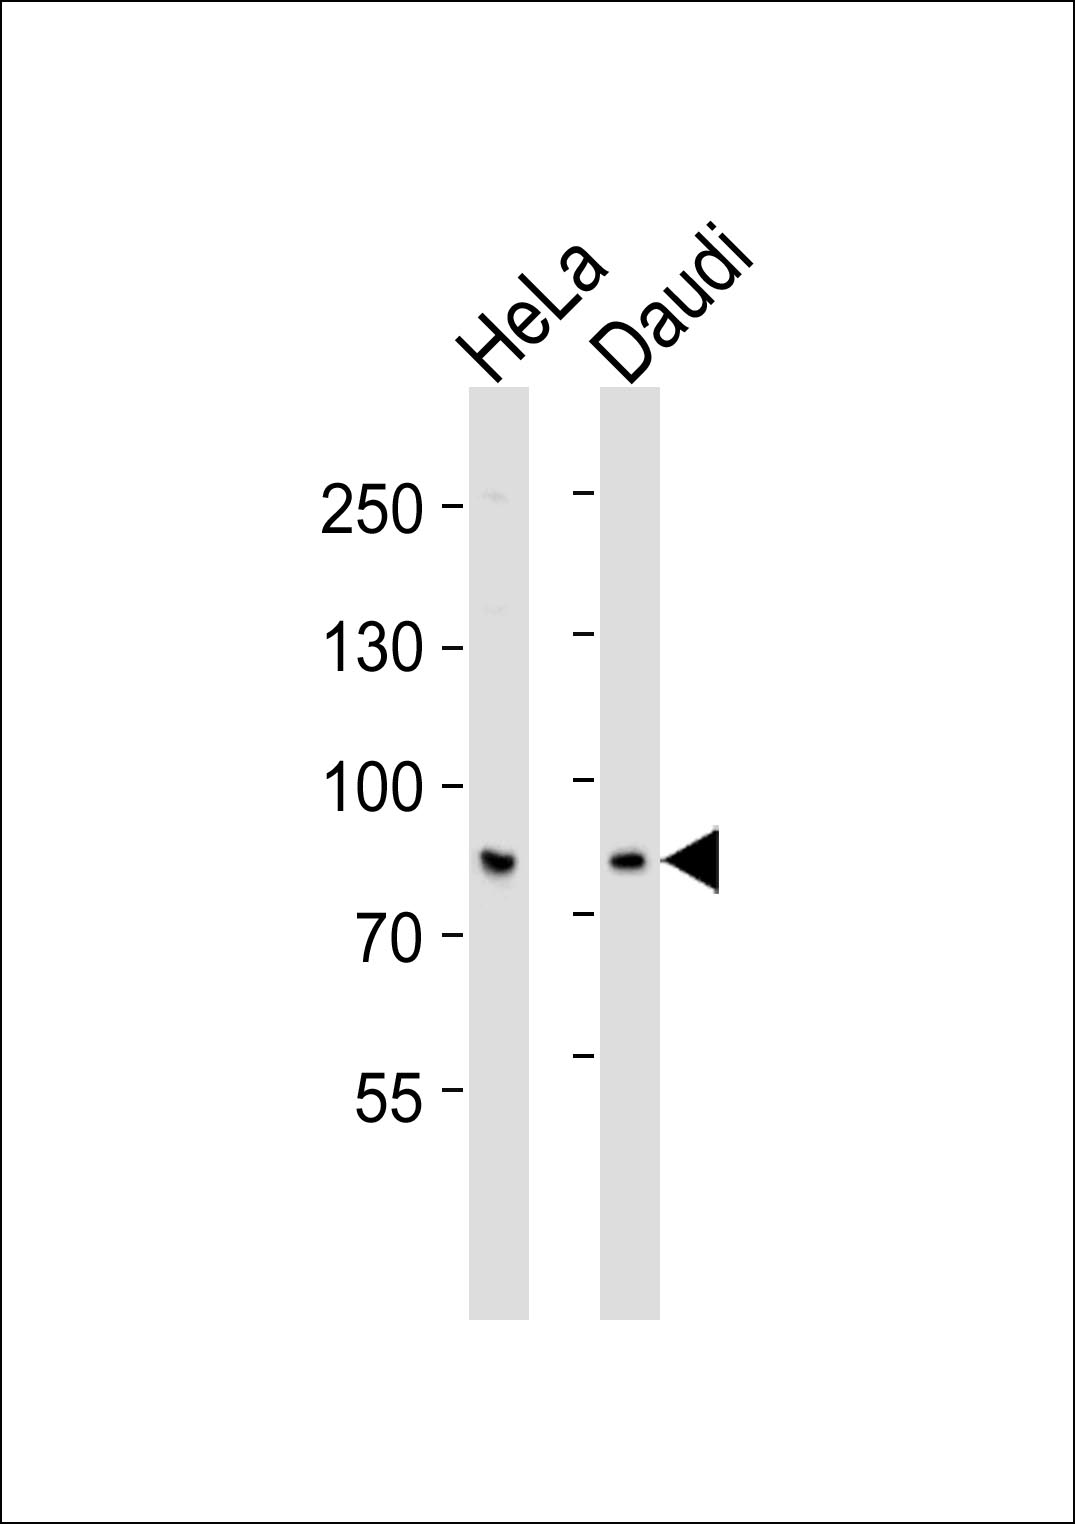 SP3 Antibody (OAAB18545) in HeLa, Daudi cell line (from left to right) using Western Blot